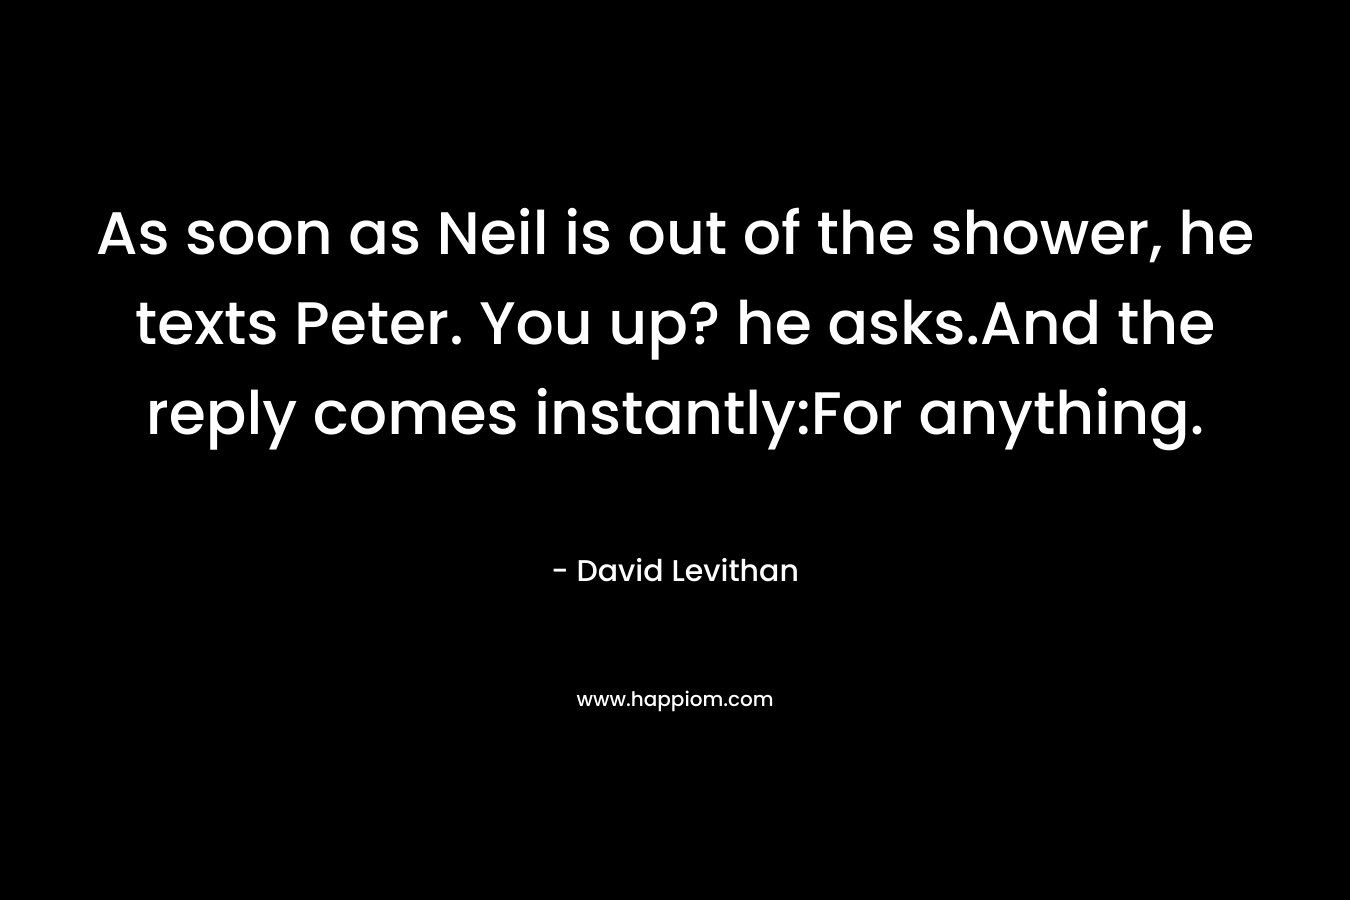 As soon as Neil is out of the shower, he texts Peter. You up? he asks.And the reply comes instantly:For anything. – David Levithan